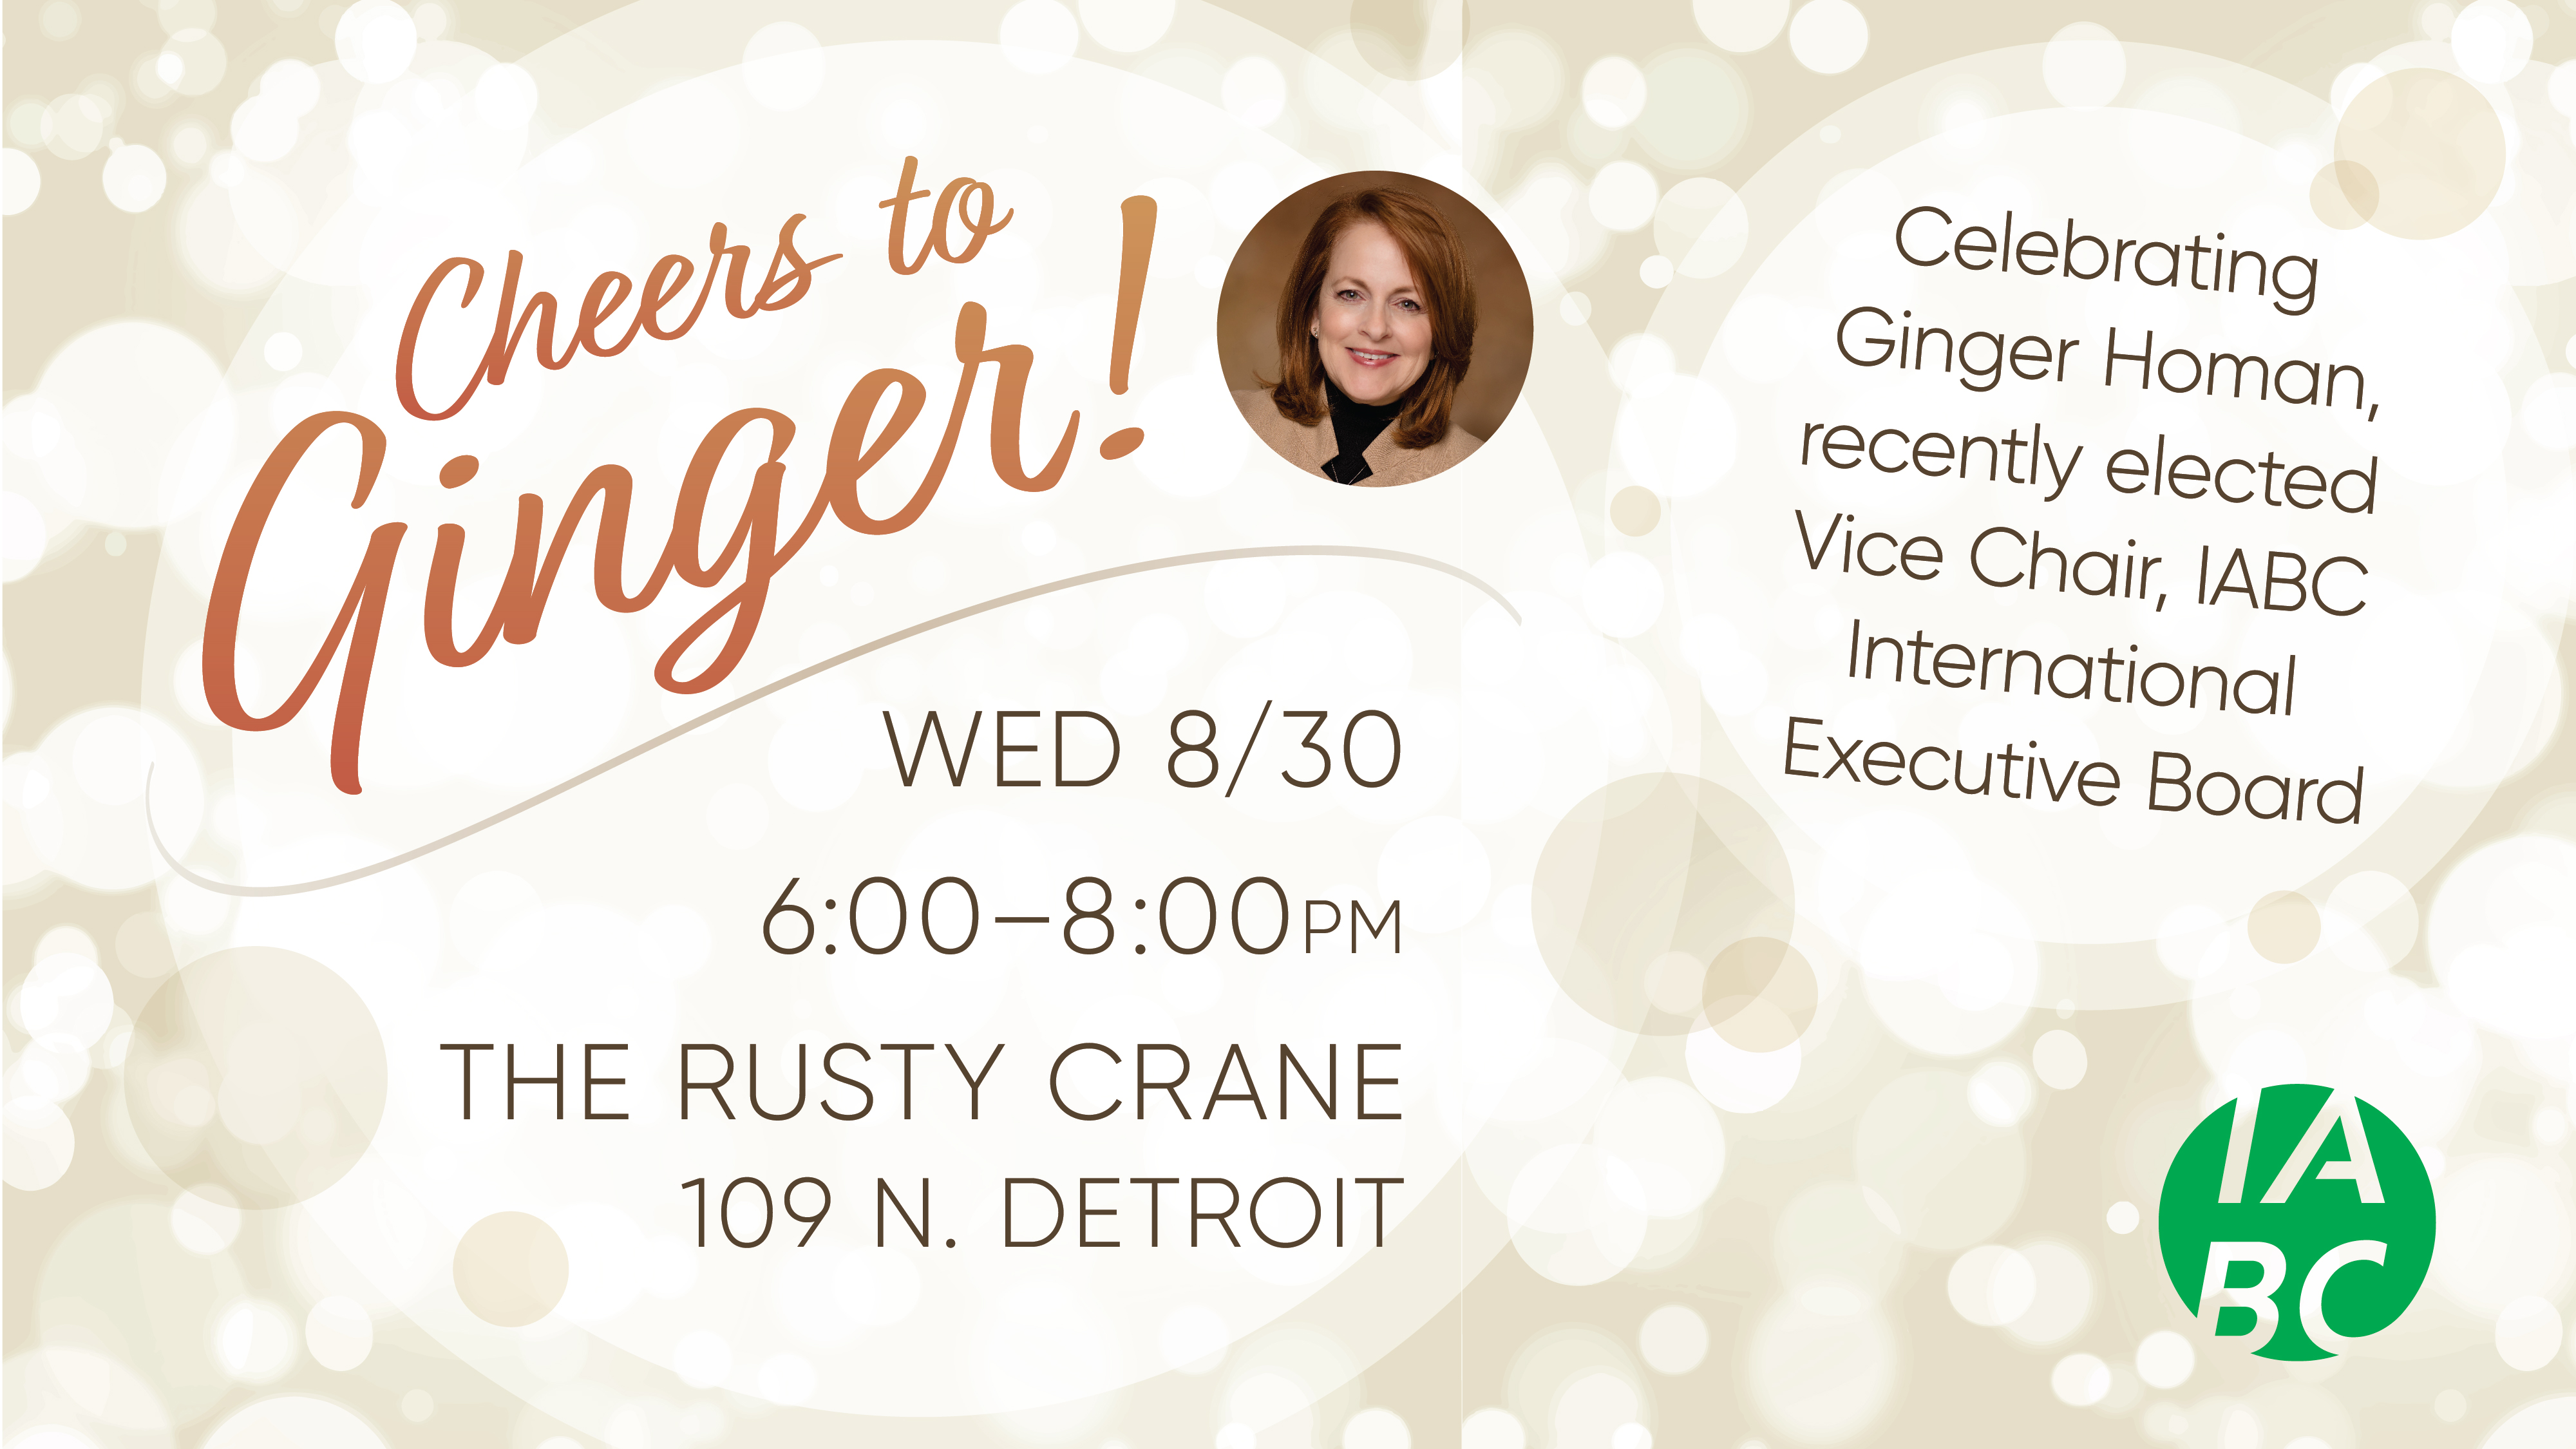 Cheers to Ginger!